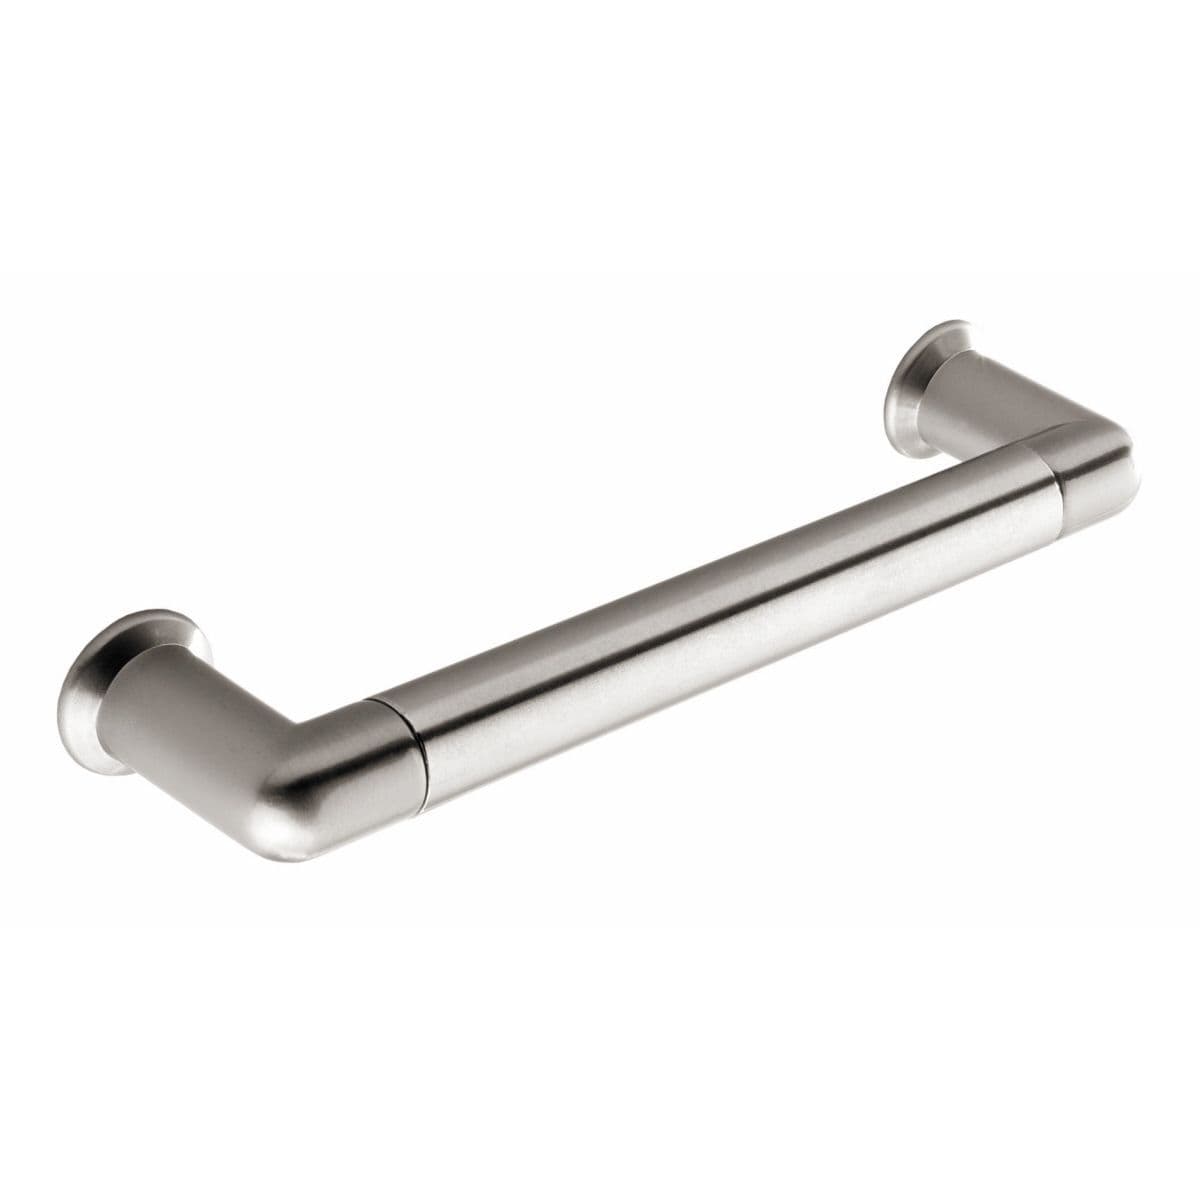 ALNE BAR Cupboard Handle - 128mm h/c size - POLISHED/SATIN STAINLESS STEEL finish (PWS H012.128.SS)